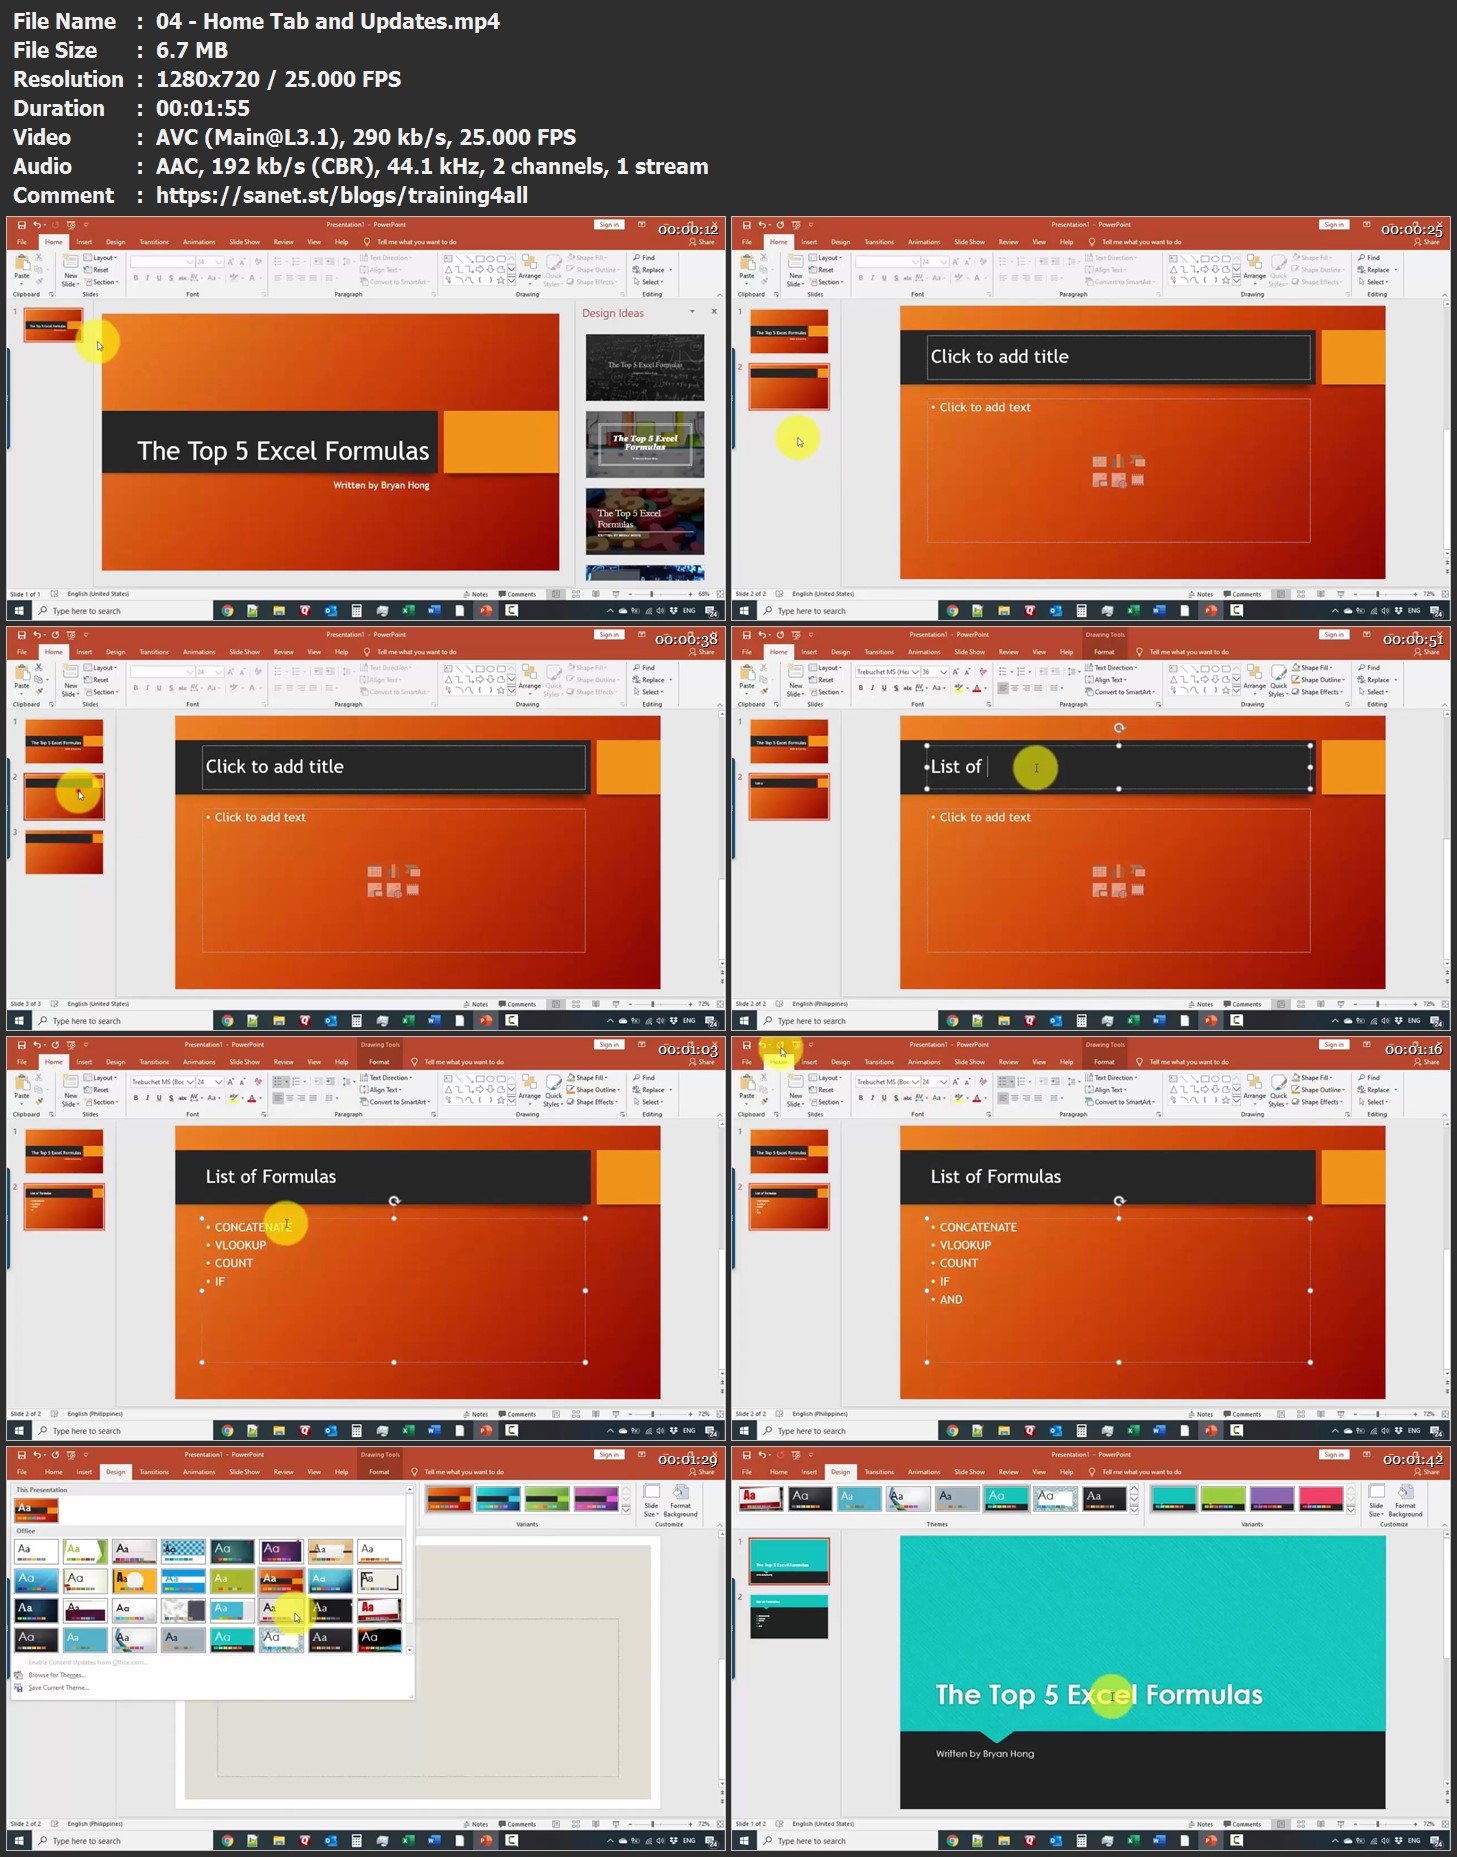 microsoft powerpoint 2019 download